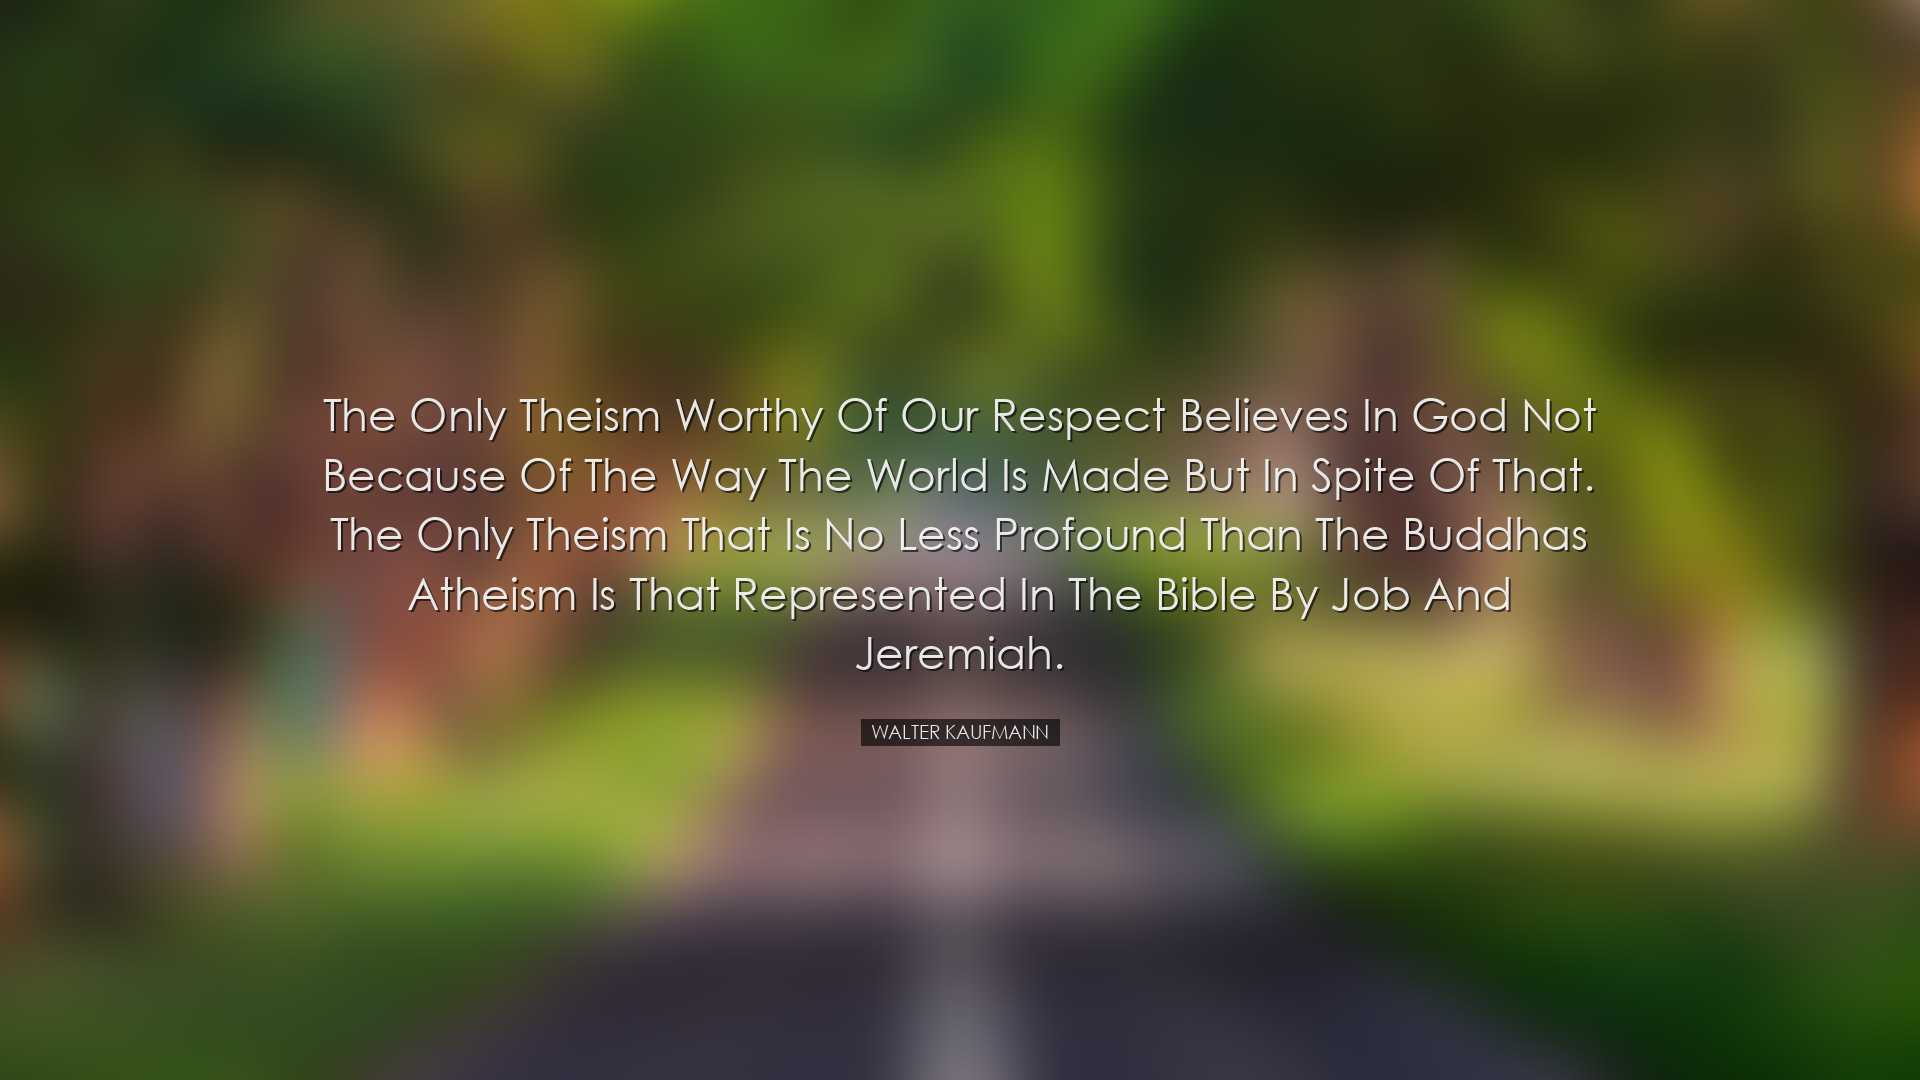 The only theism worthy of our respect believes in God not because